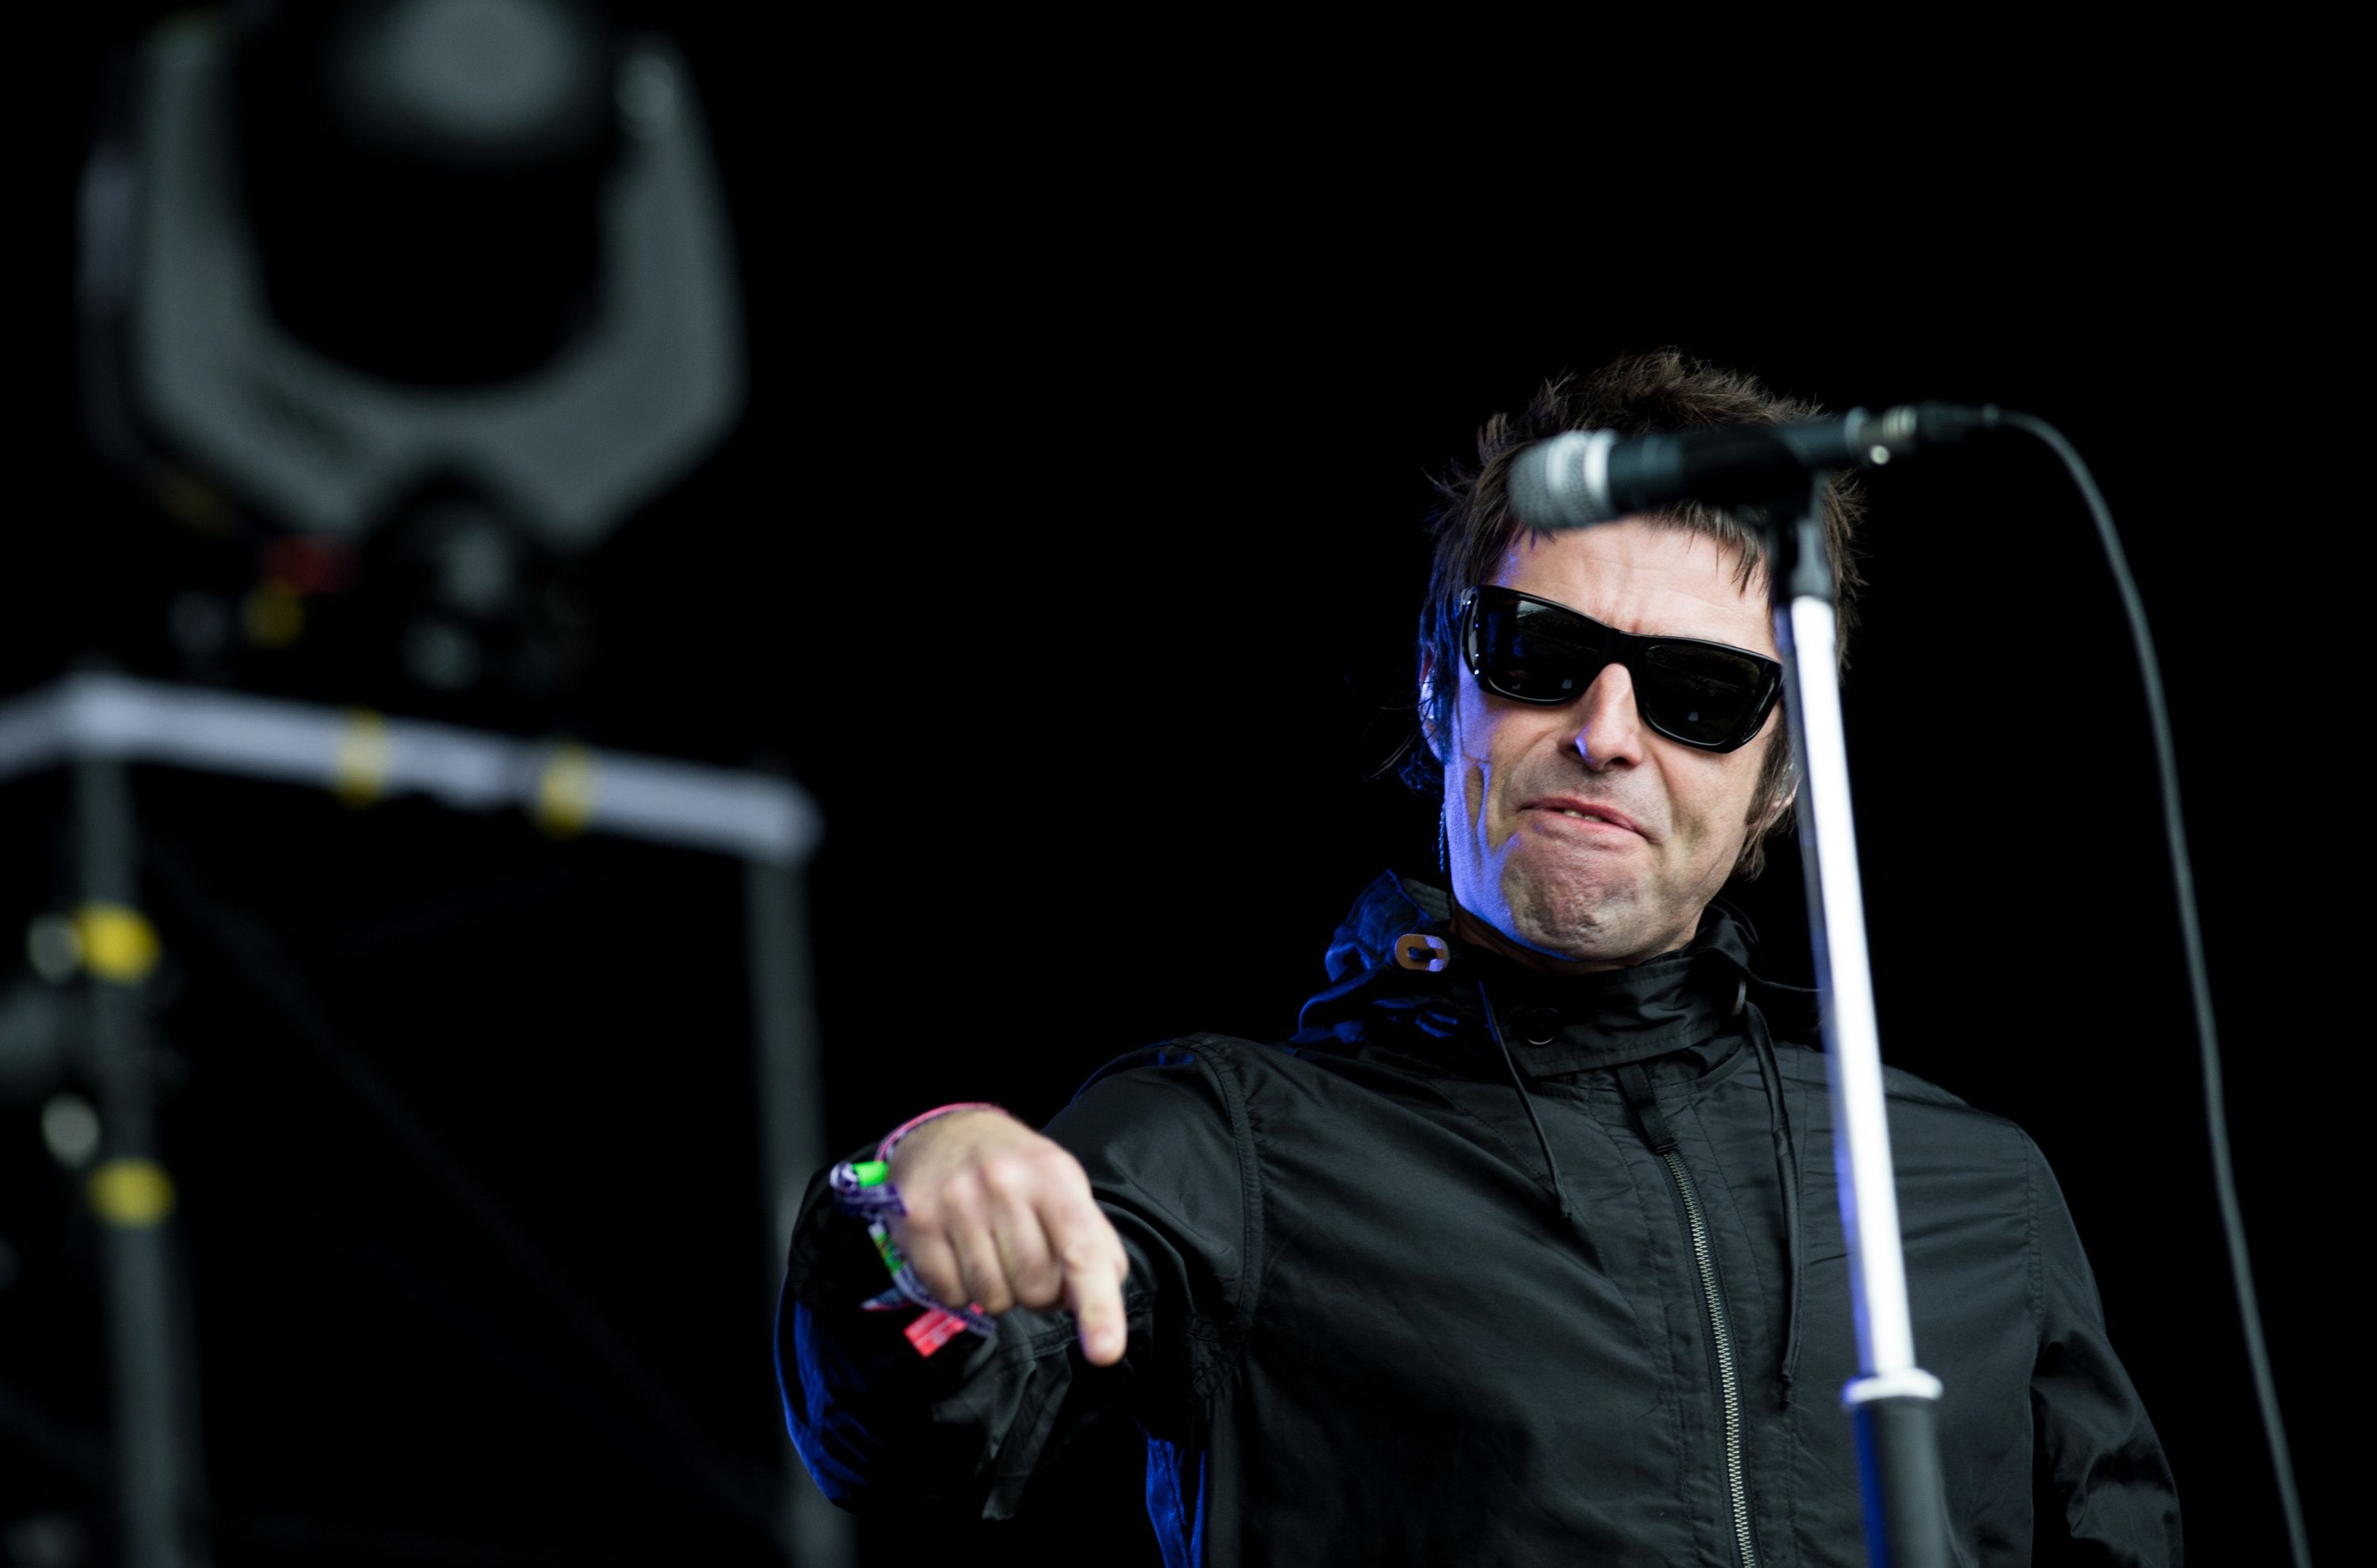 GLASTONBURY, ENGLAND - JUNE 28: Liam Gallagher of 'Beady Eye' performs live on the Other Stage at day 2 of the 2013 Glastonbury Festival at Worthy Farm on June 28, 2013 in Glastonbury, England. (Photo by Ian Gavan/Getty Images)